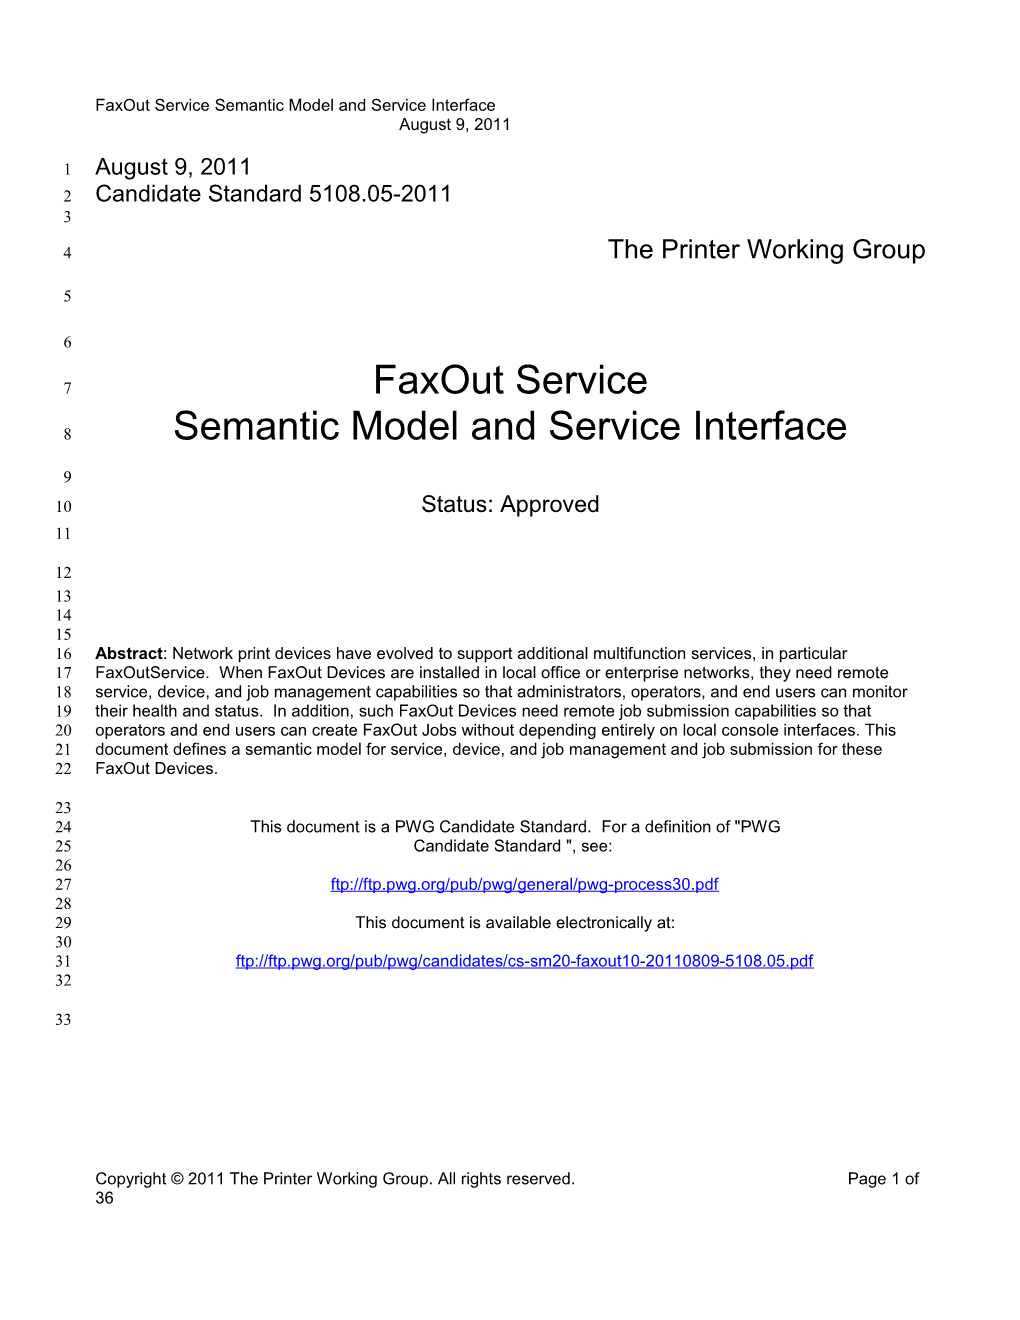 Faxout Service: Semantic Model and Service Interface